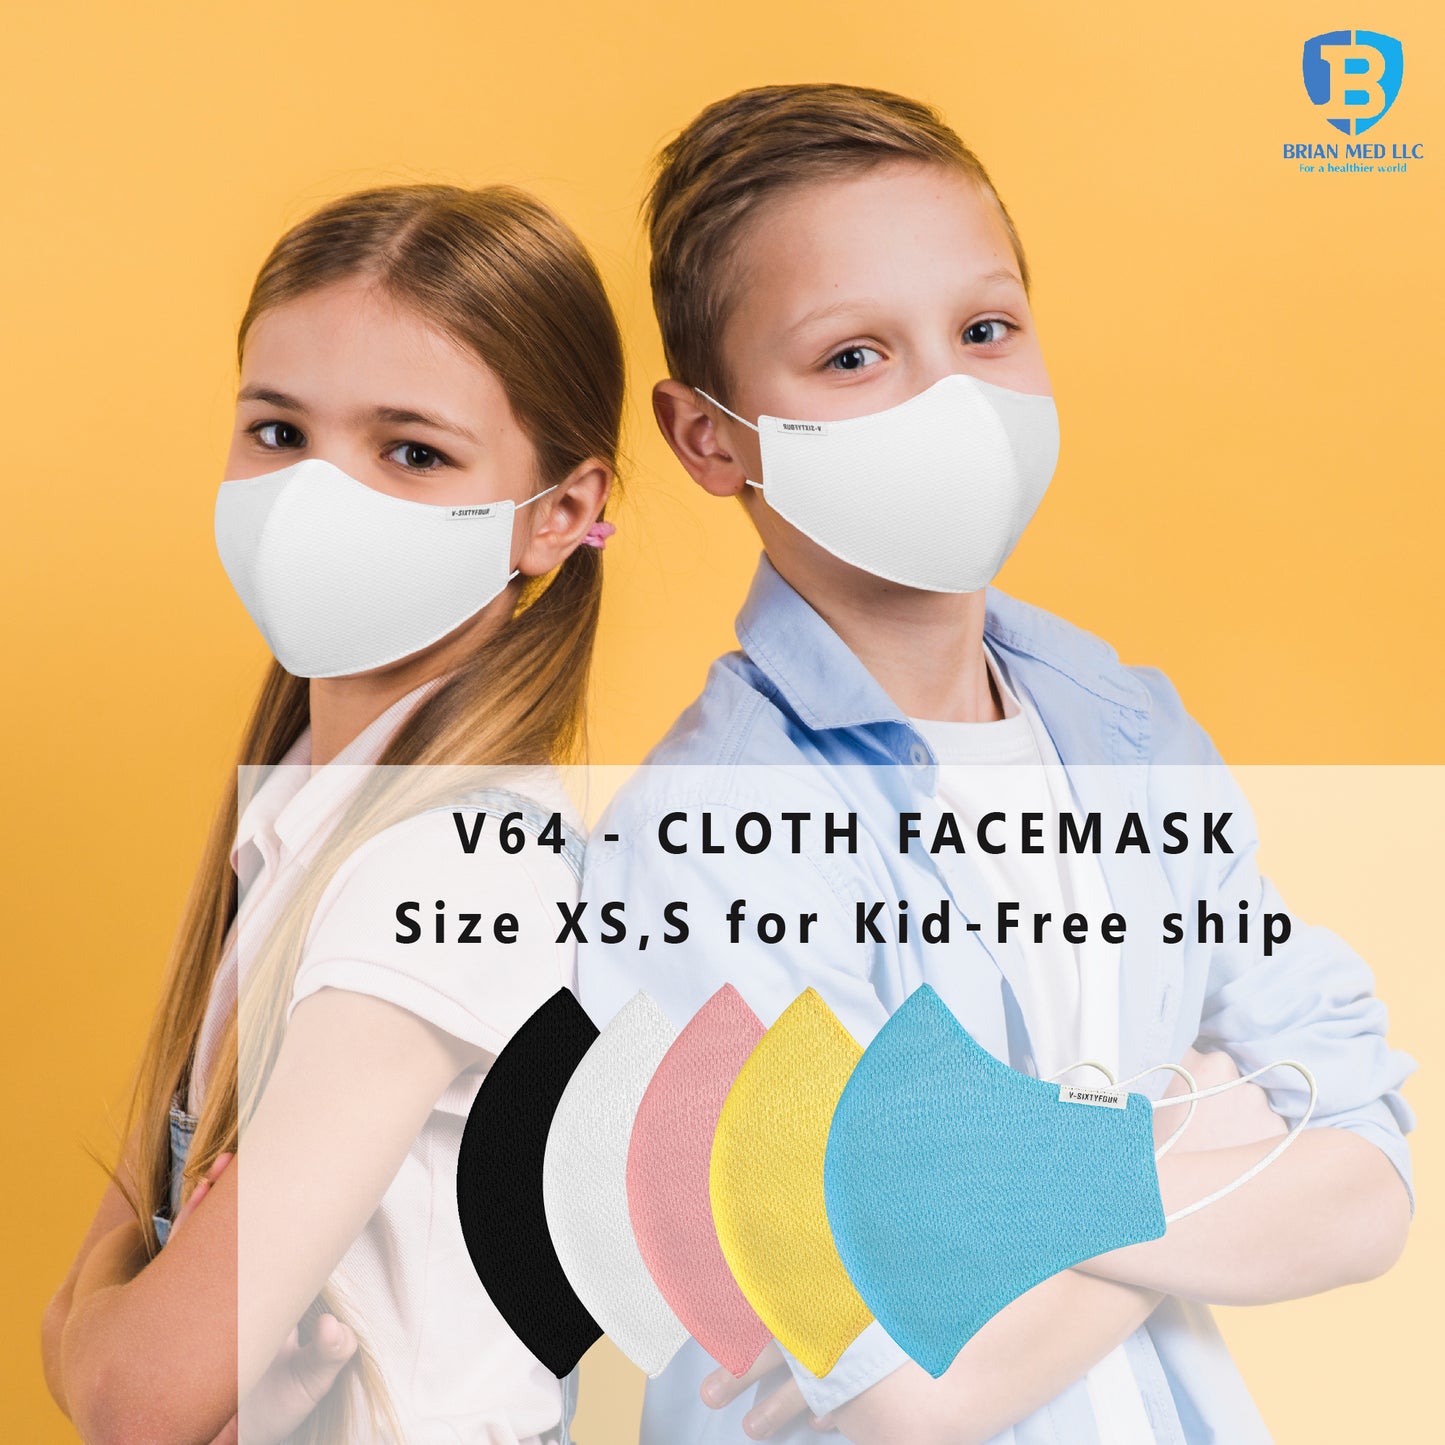 [Pack of 5] 3-Layer cloth face mask. Non-medical grade. Comfort, breathable. Made in Vietnam. BLA